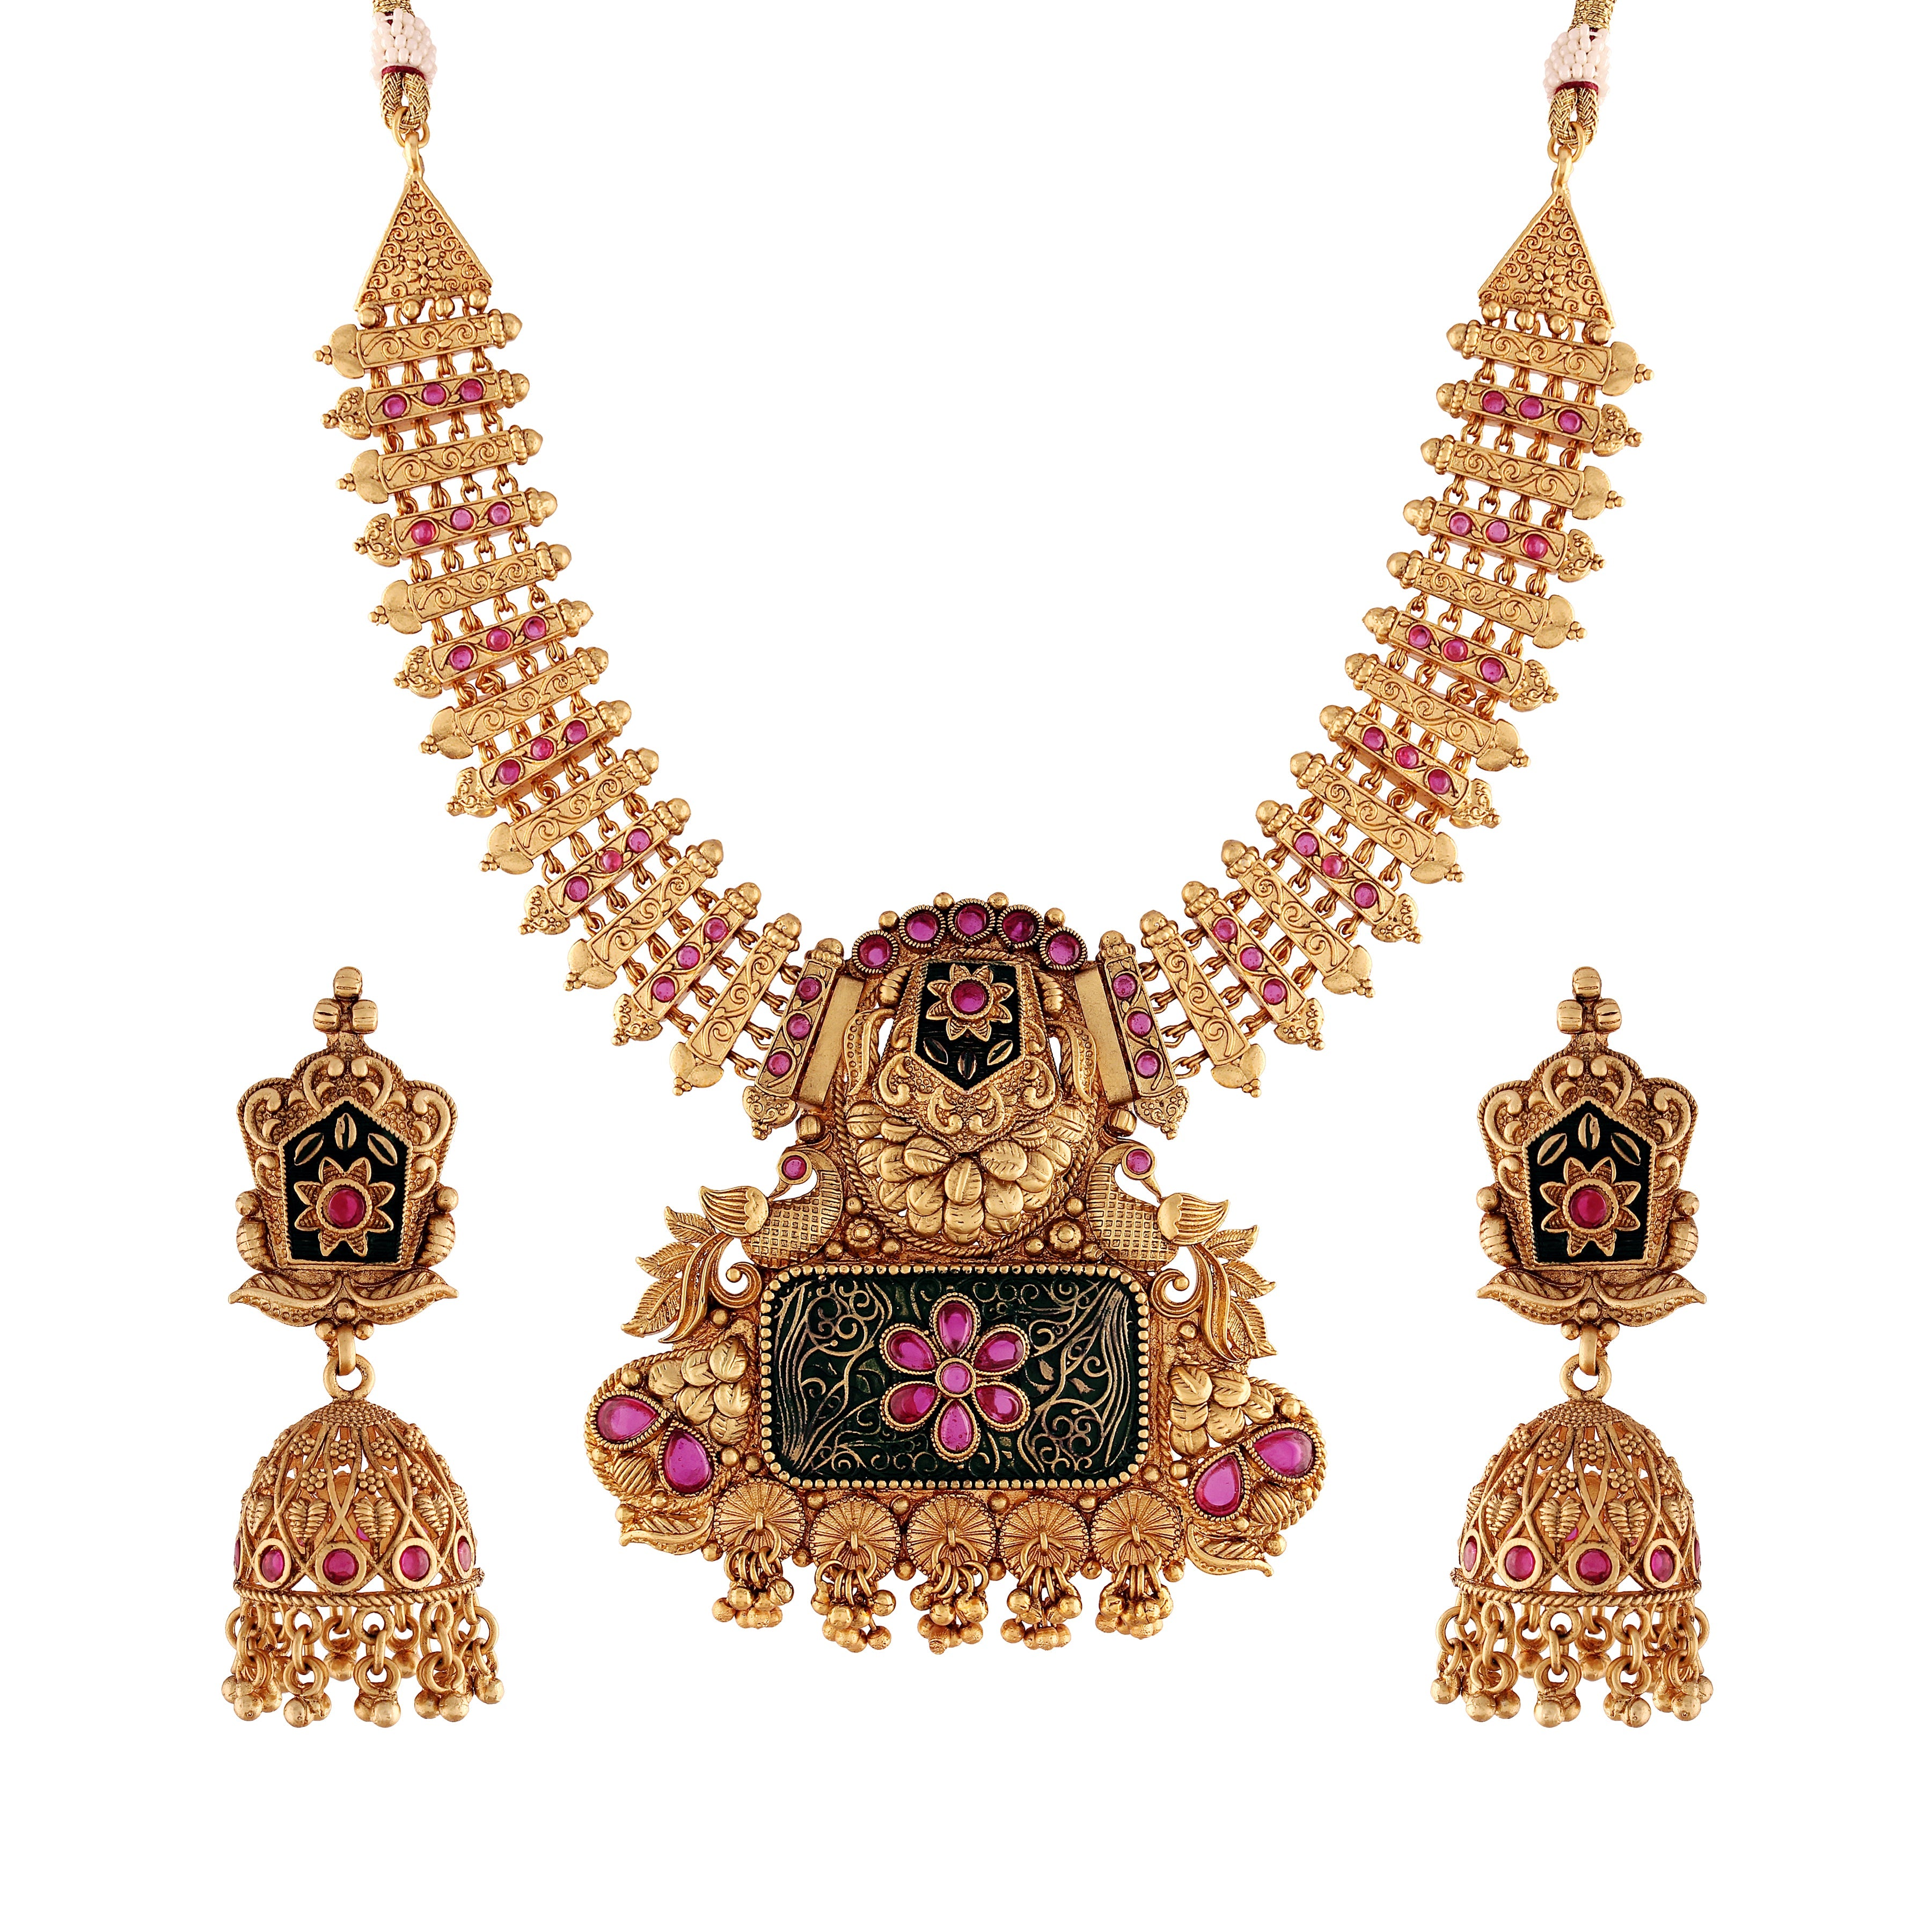 Women's Traditional Temple Choker Necklace Jewellery Set  - I Jewels